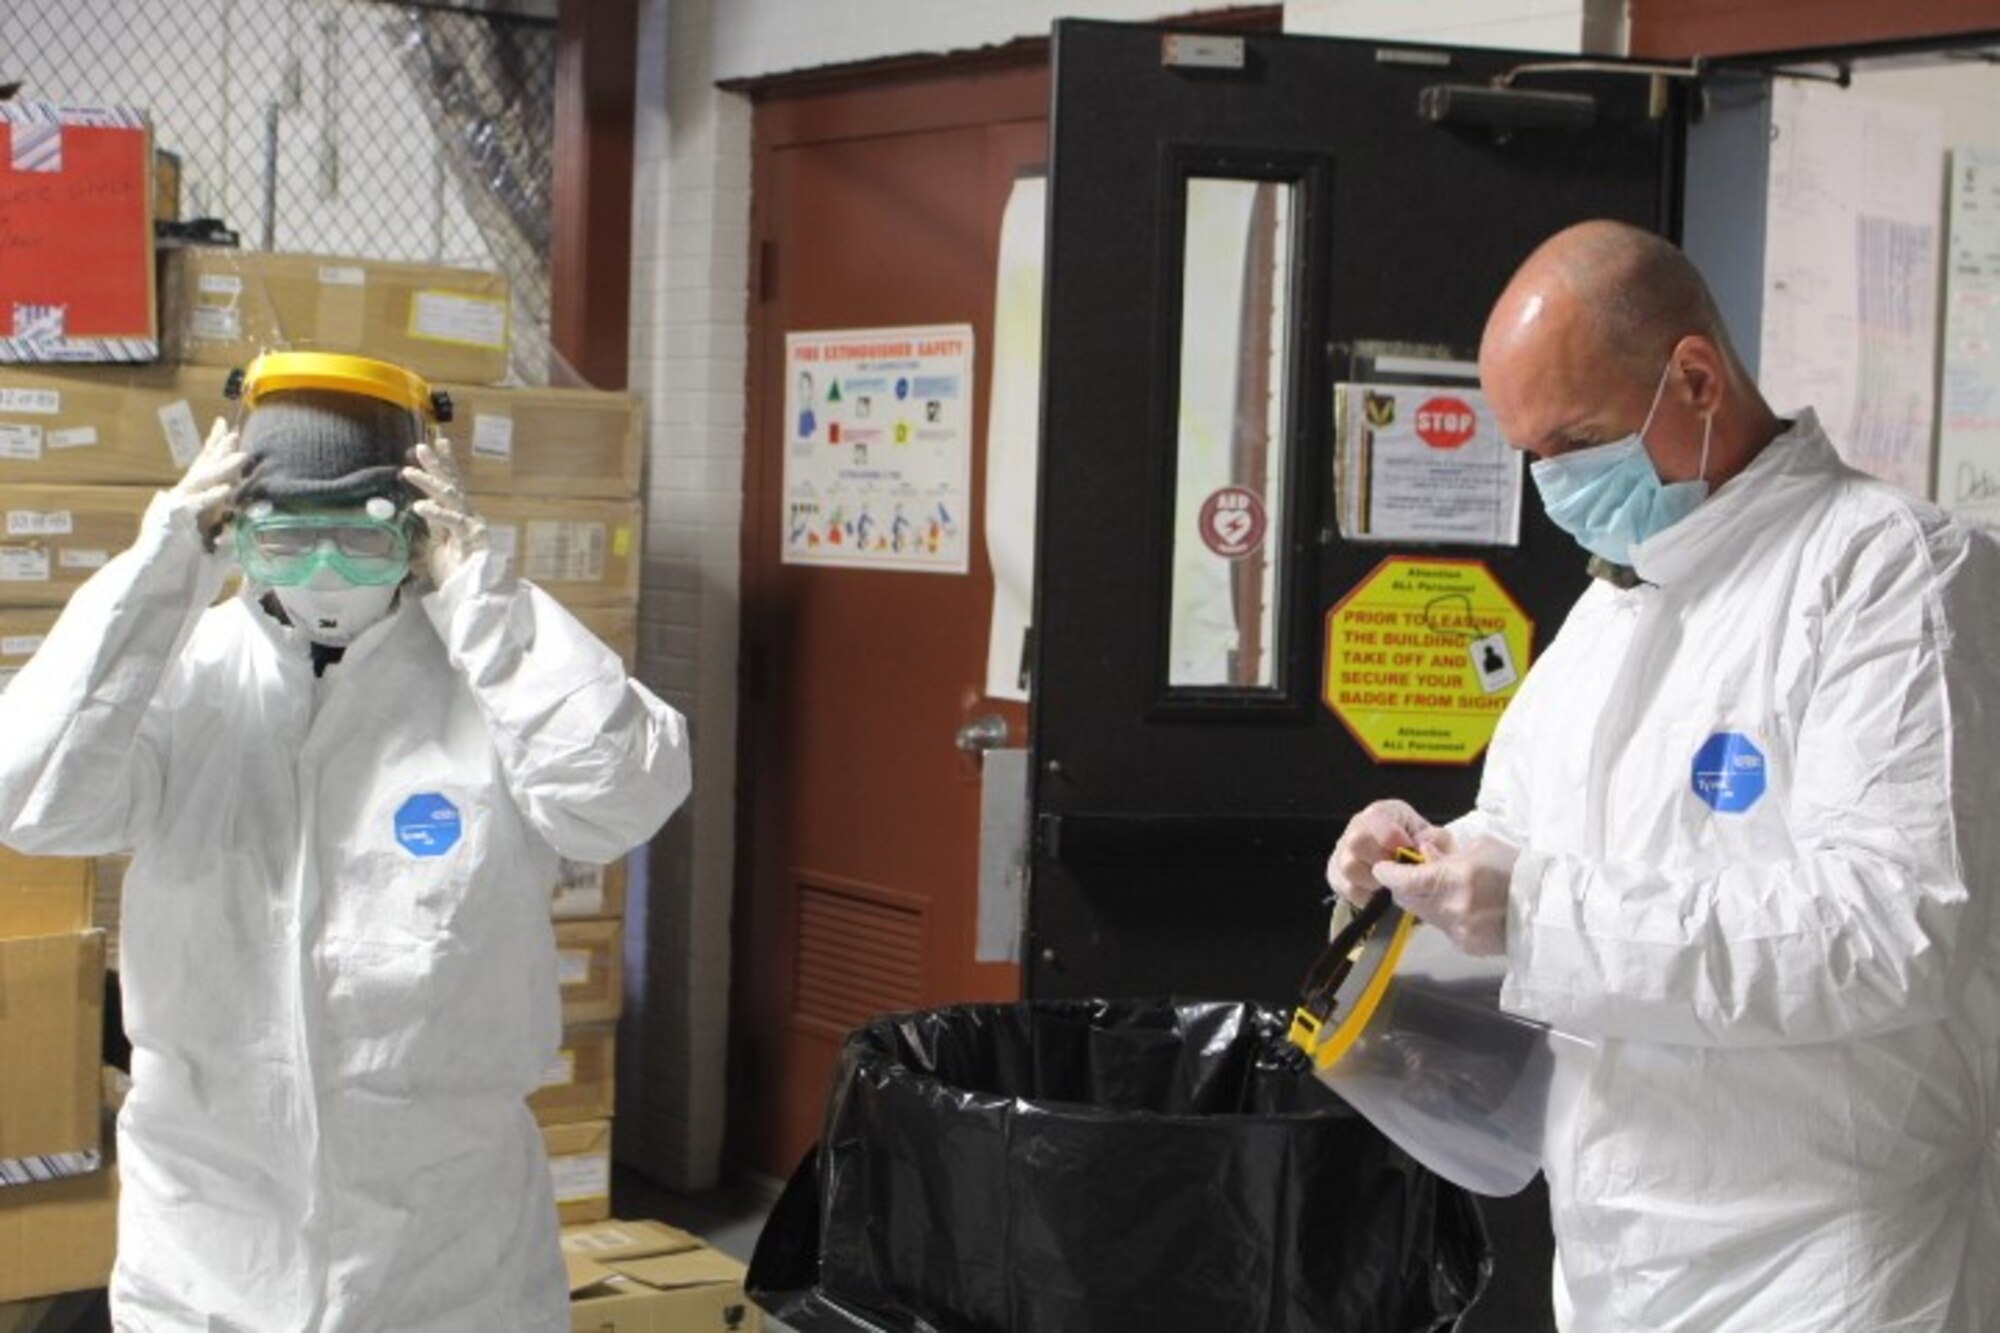 Members of the 480th Intelligence, Surveillance, and Reconnaissance Wing Emergency Management’s cleaning team puts on their protective gear May 29, 2020 at Joint Base Langley-Eustis, Va. The EM team developed parameters and cleaning teams to perform trace cleanings to prevent any additional COVID-19 exposures within the building.